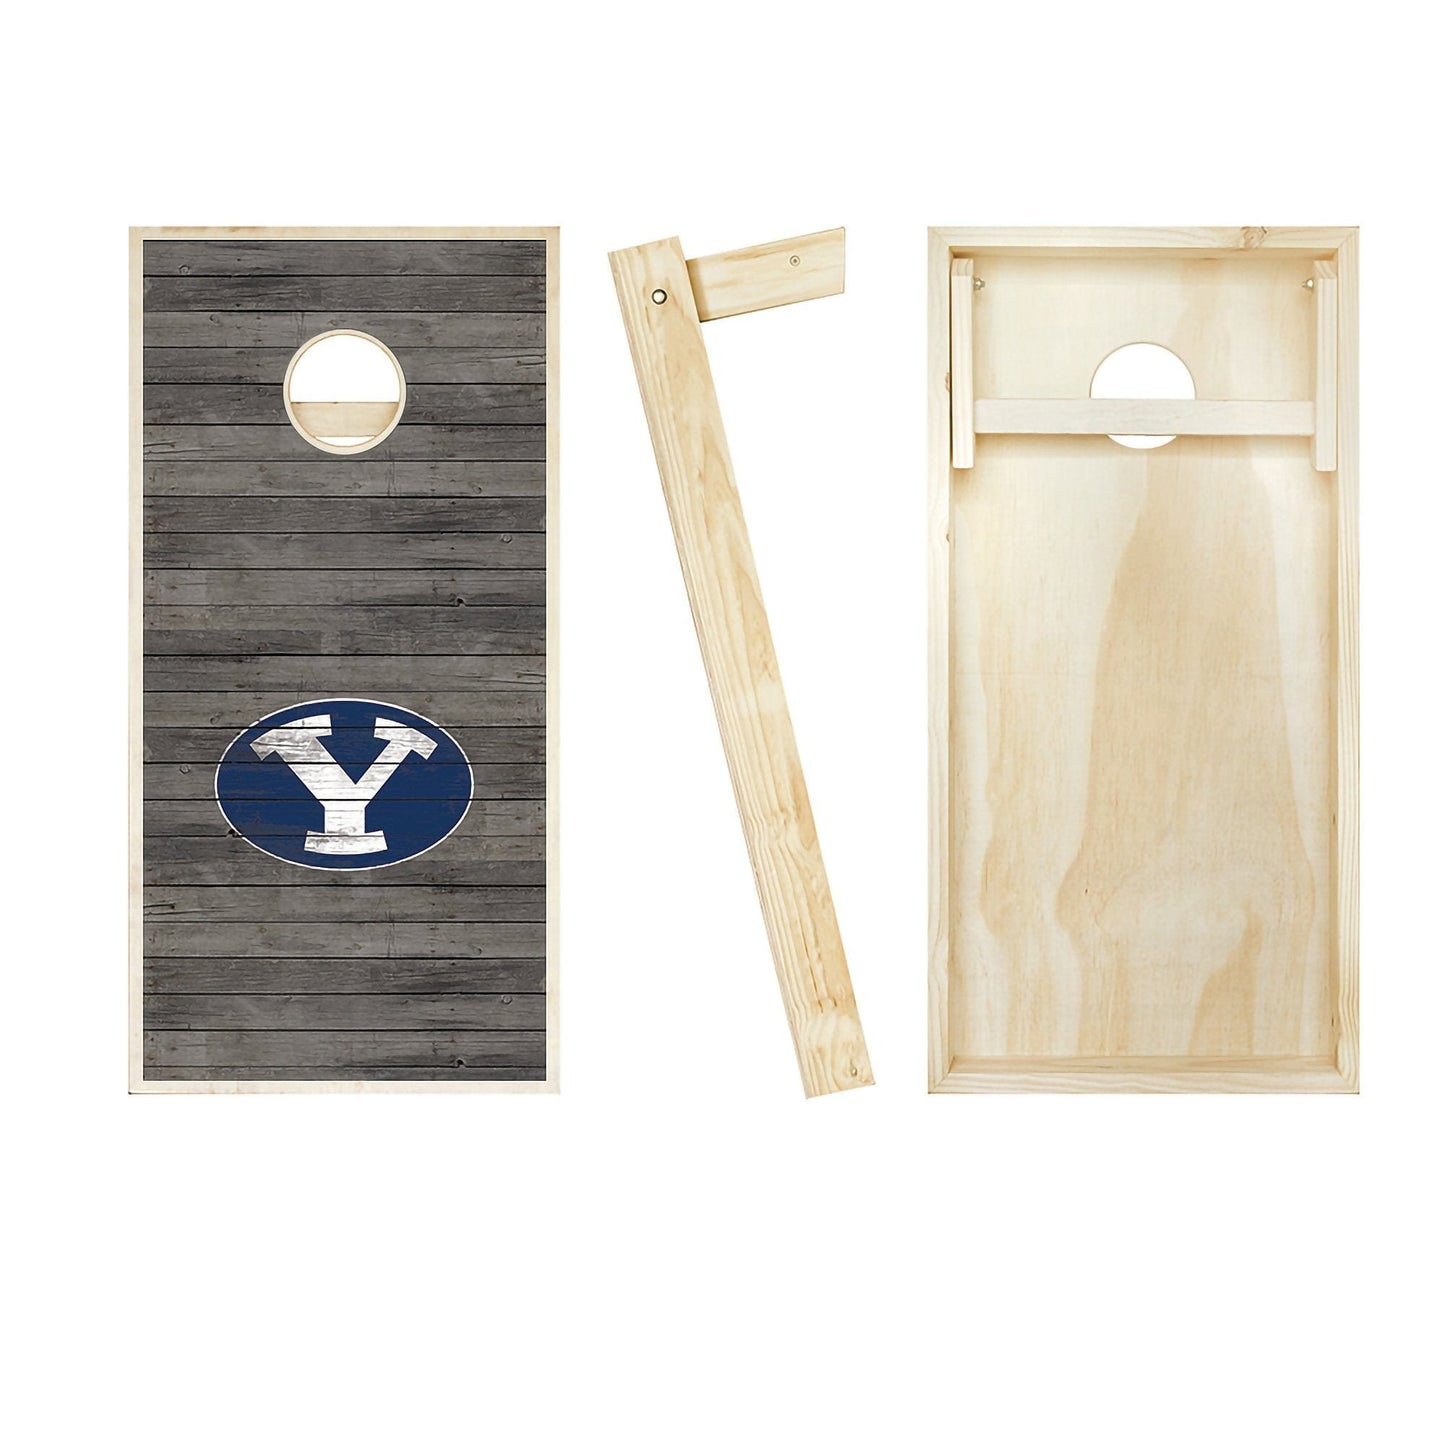 BYU Cougars Distressed board entire set